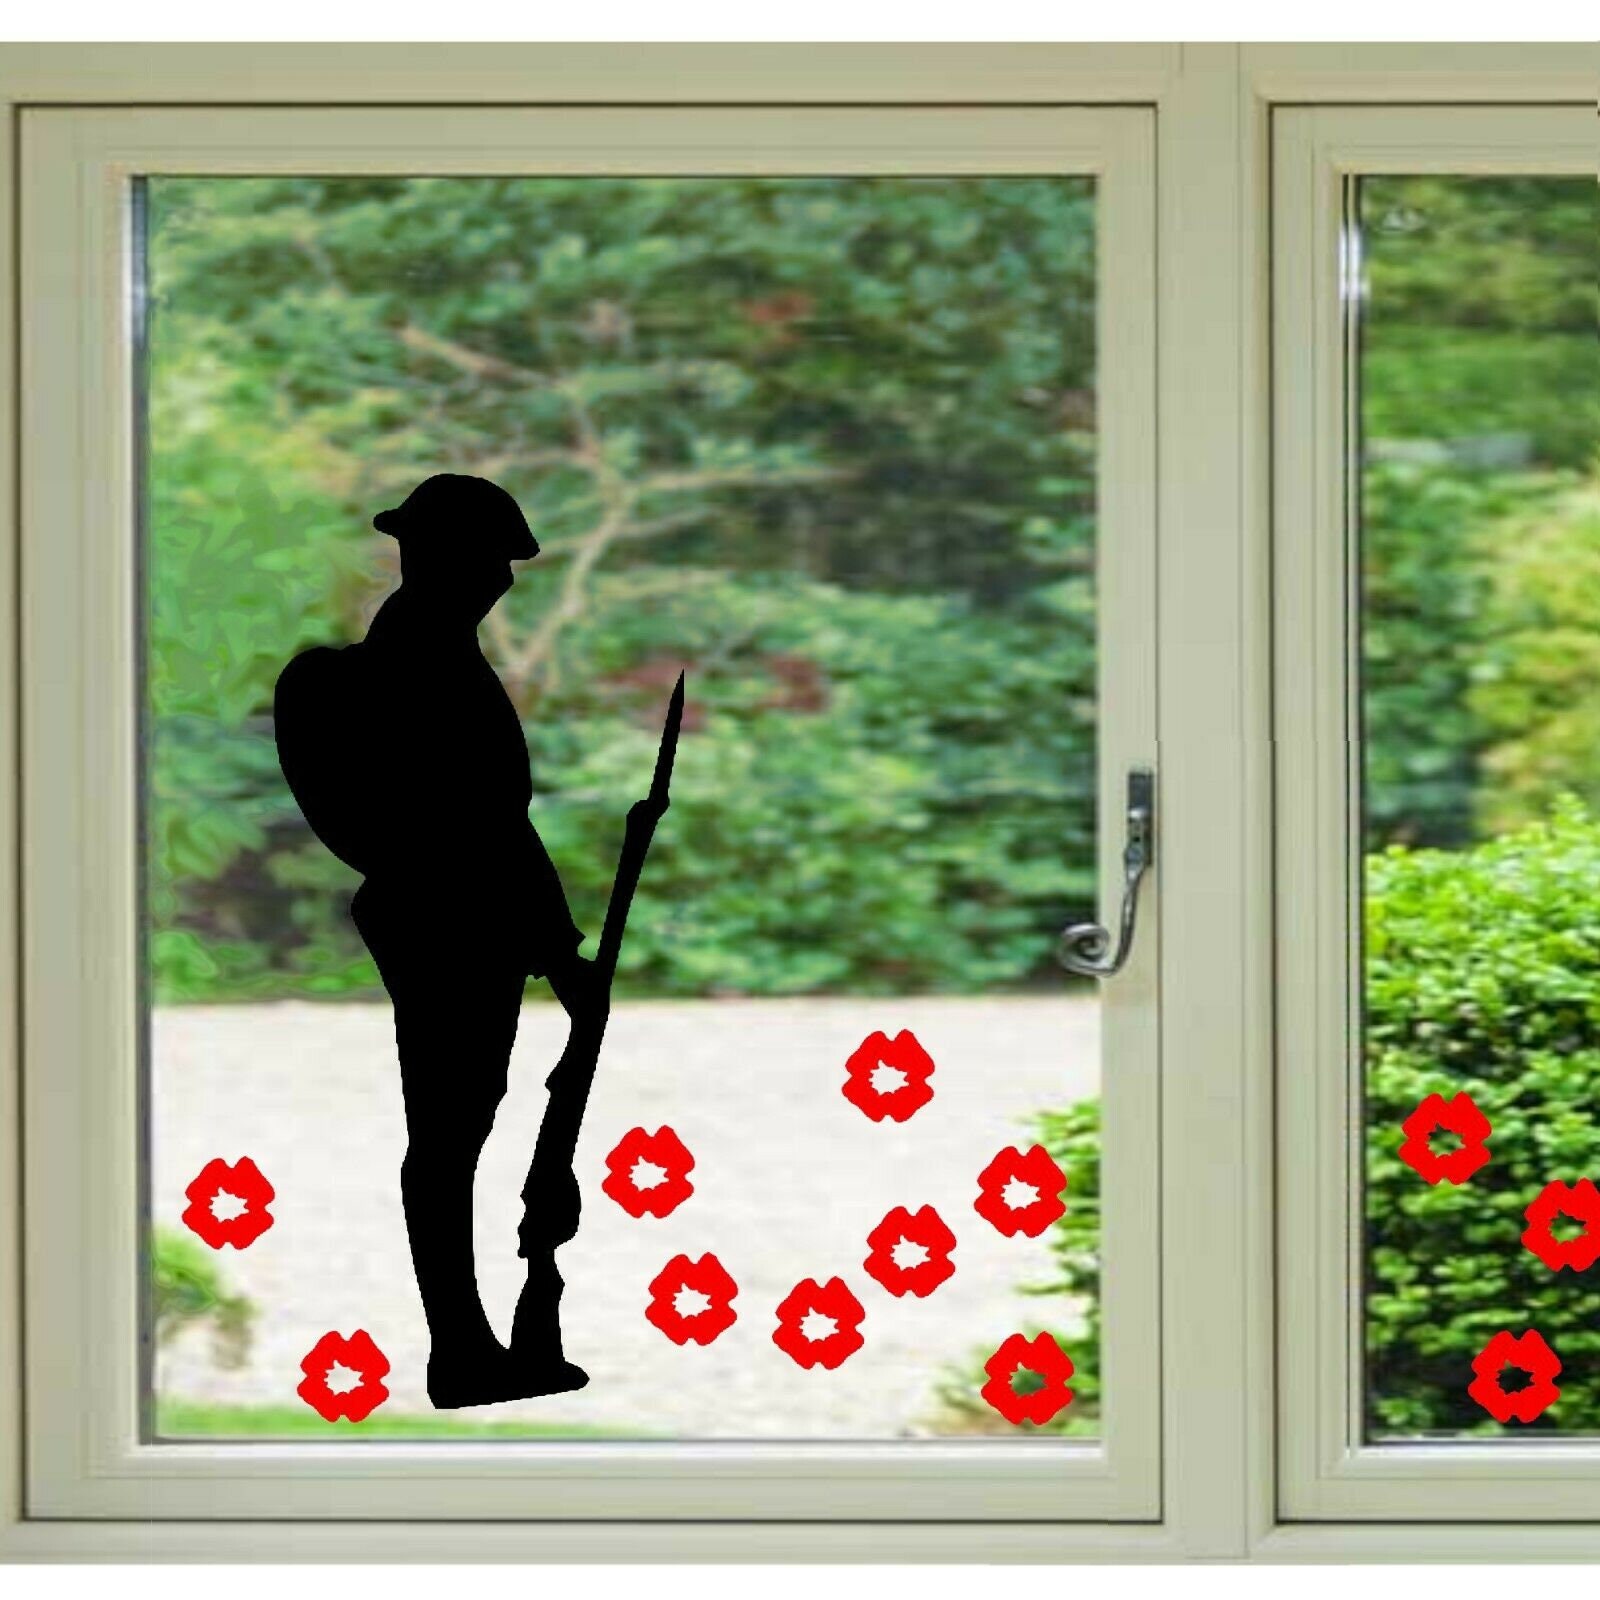 Lest we forget remembrance day rememberance window vinyl sticker decal poppy car